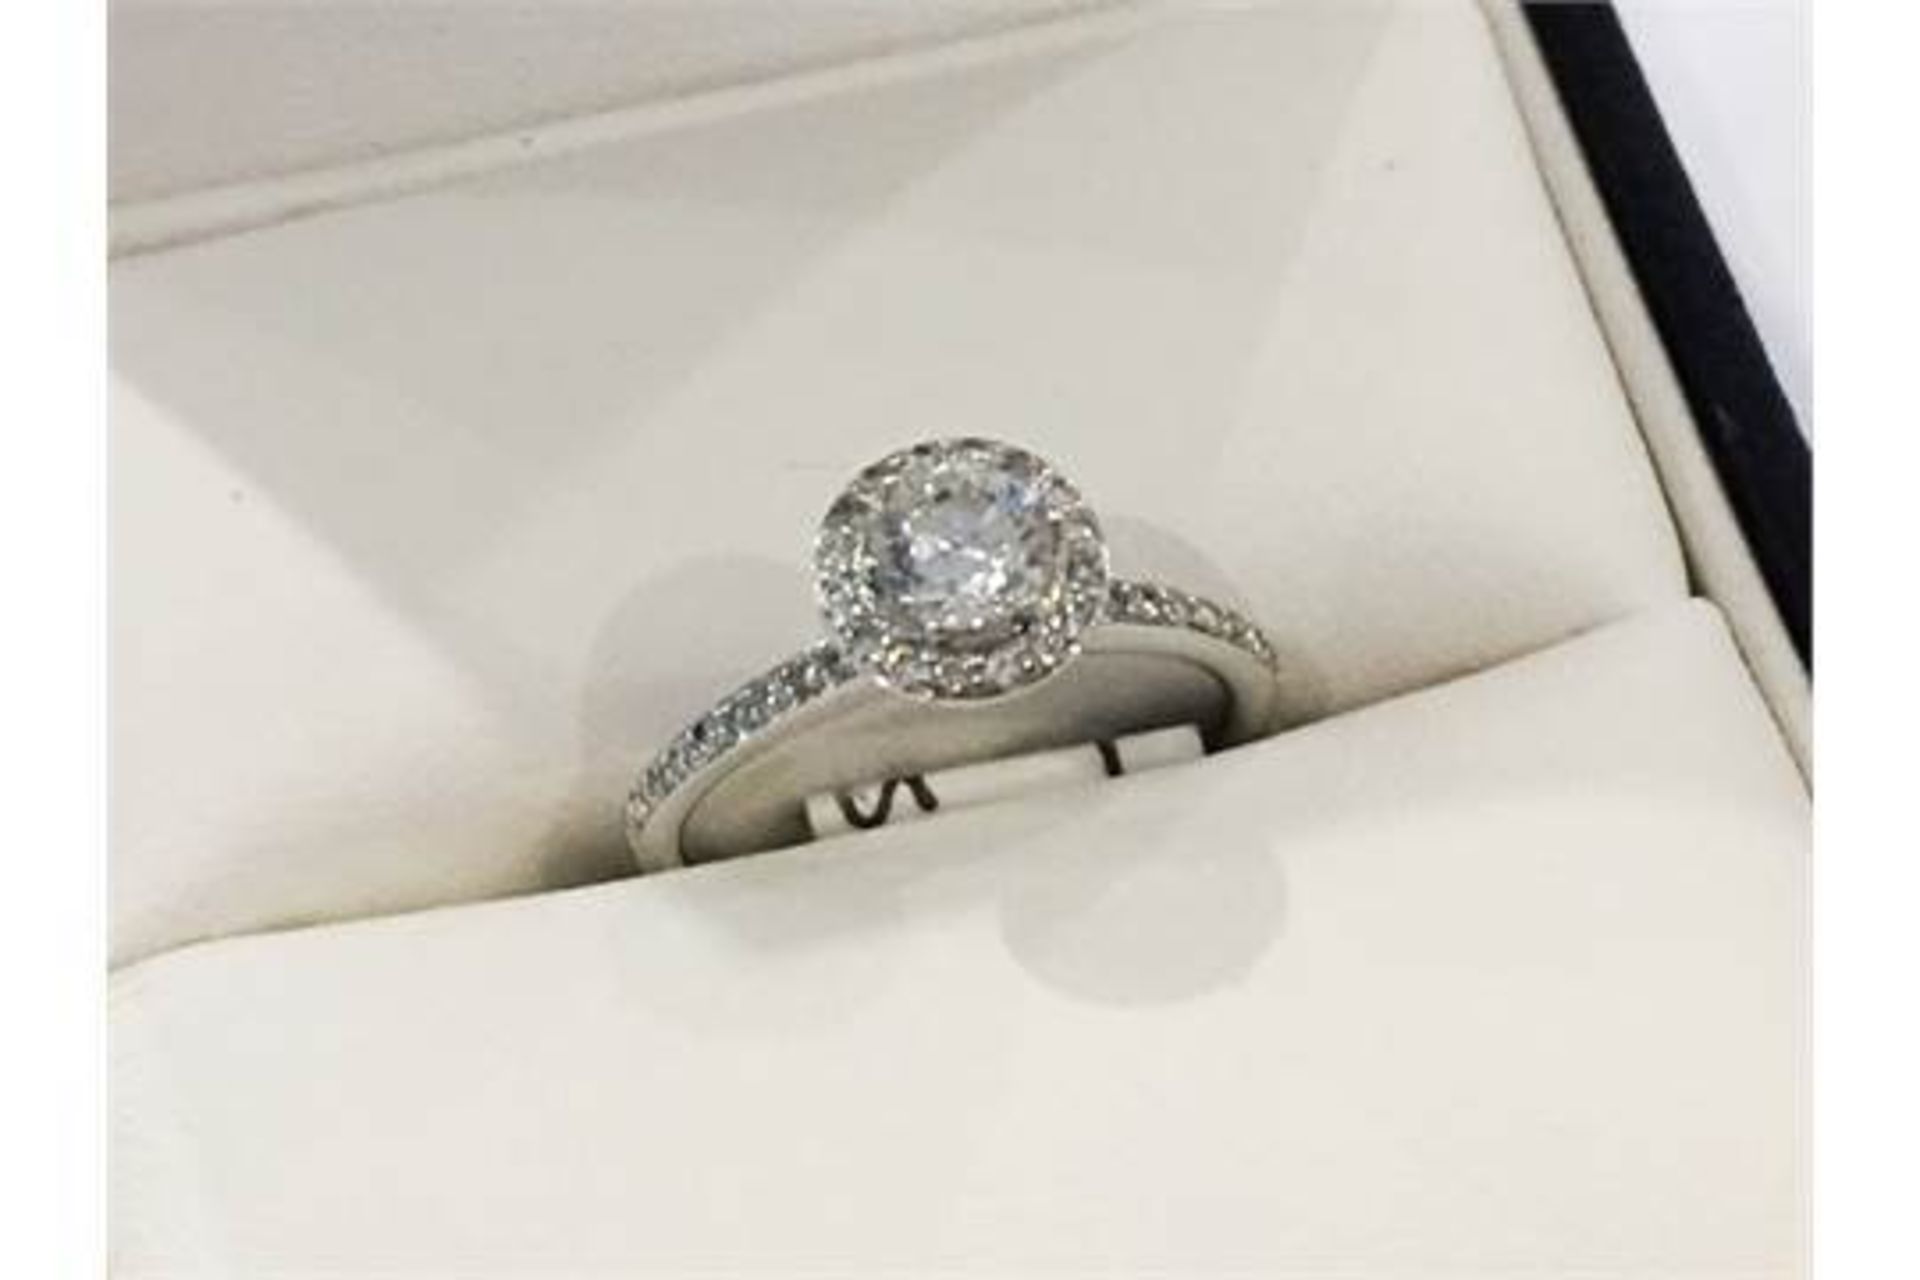 14ct WHITE GOLD LADIES DIAMOND RING, SET WITH A SINGLE SOLITAIRE, SURROUNDED BY DIAMONDS IN A HALO